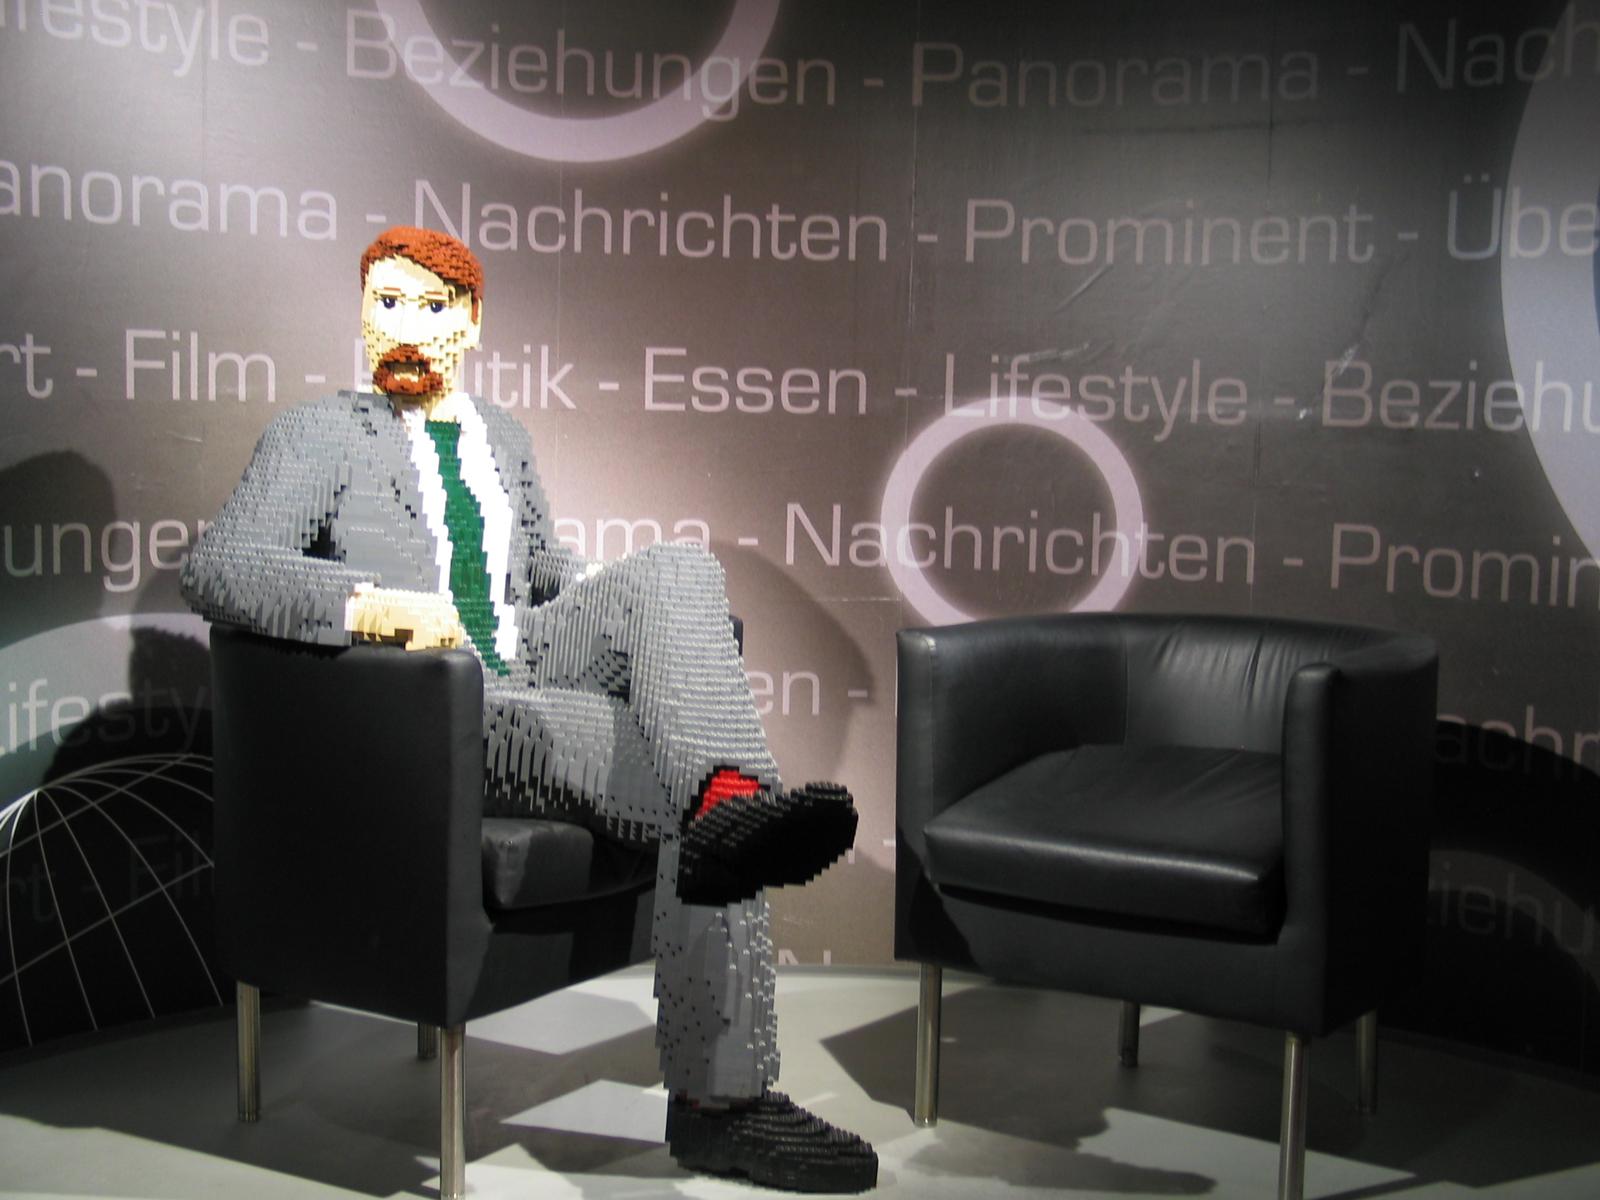 Some famous German talkshow host in Lego